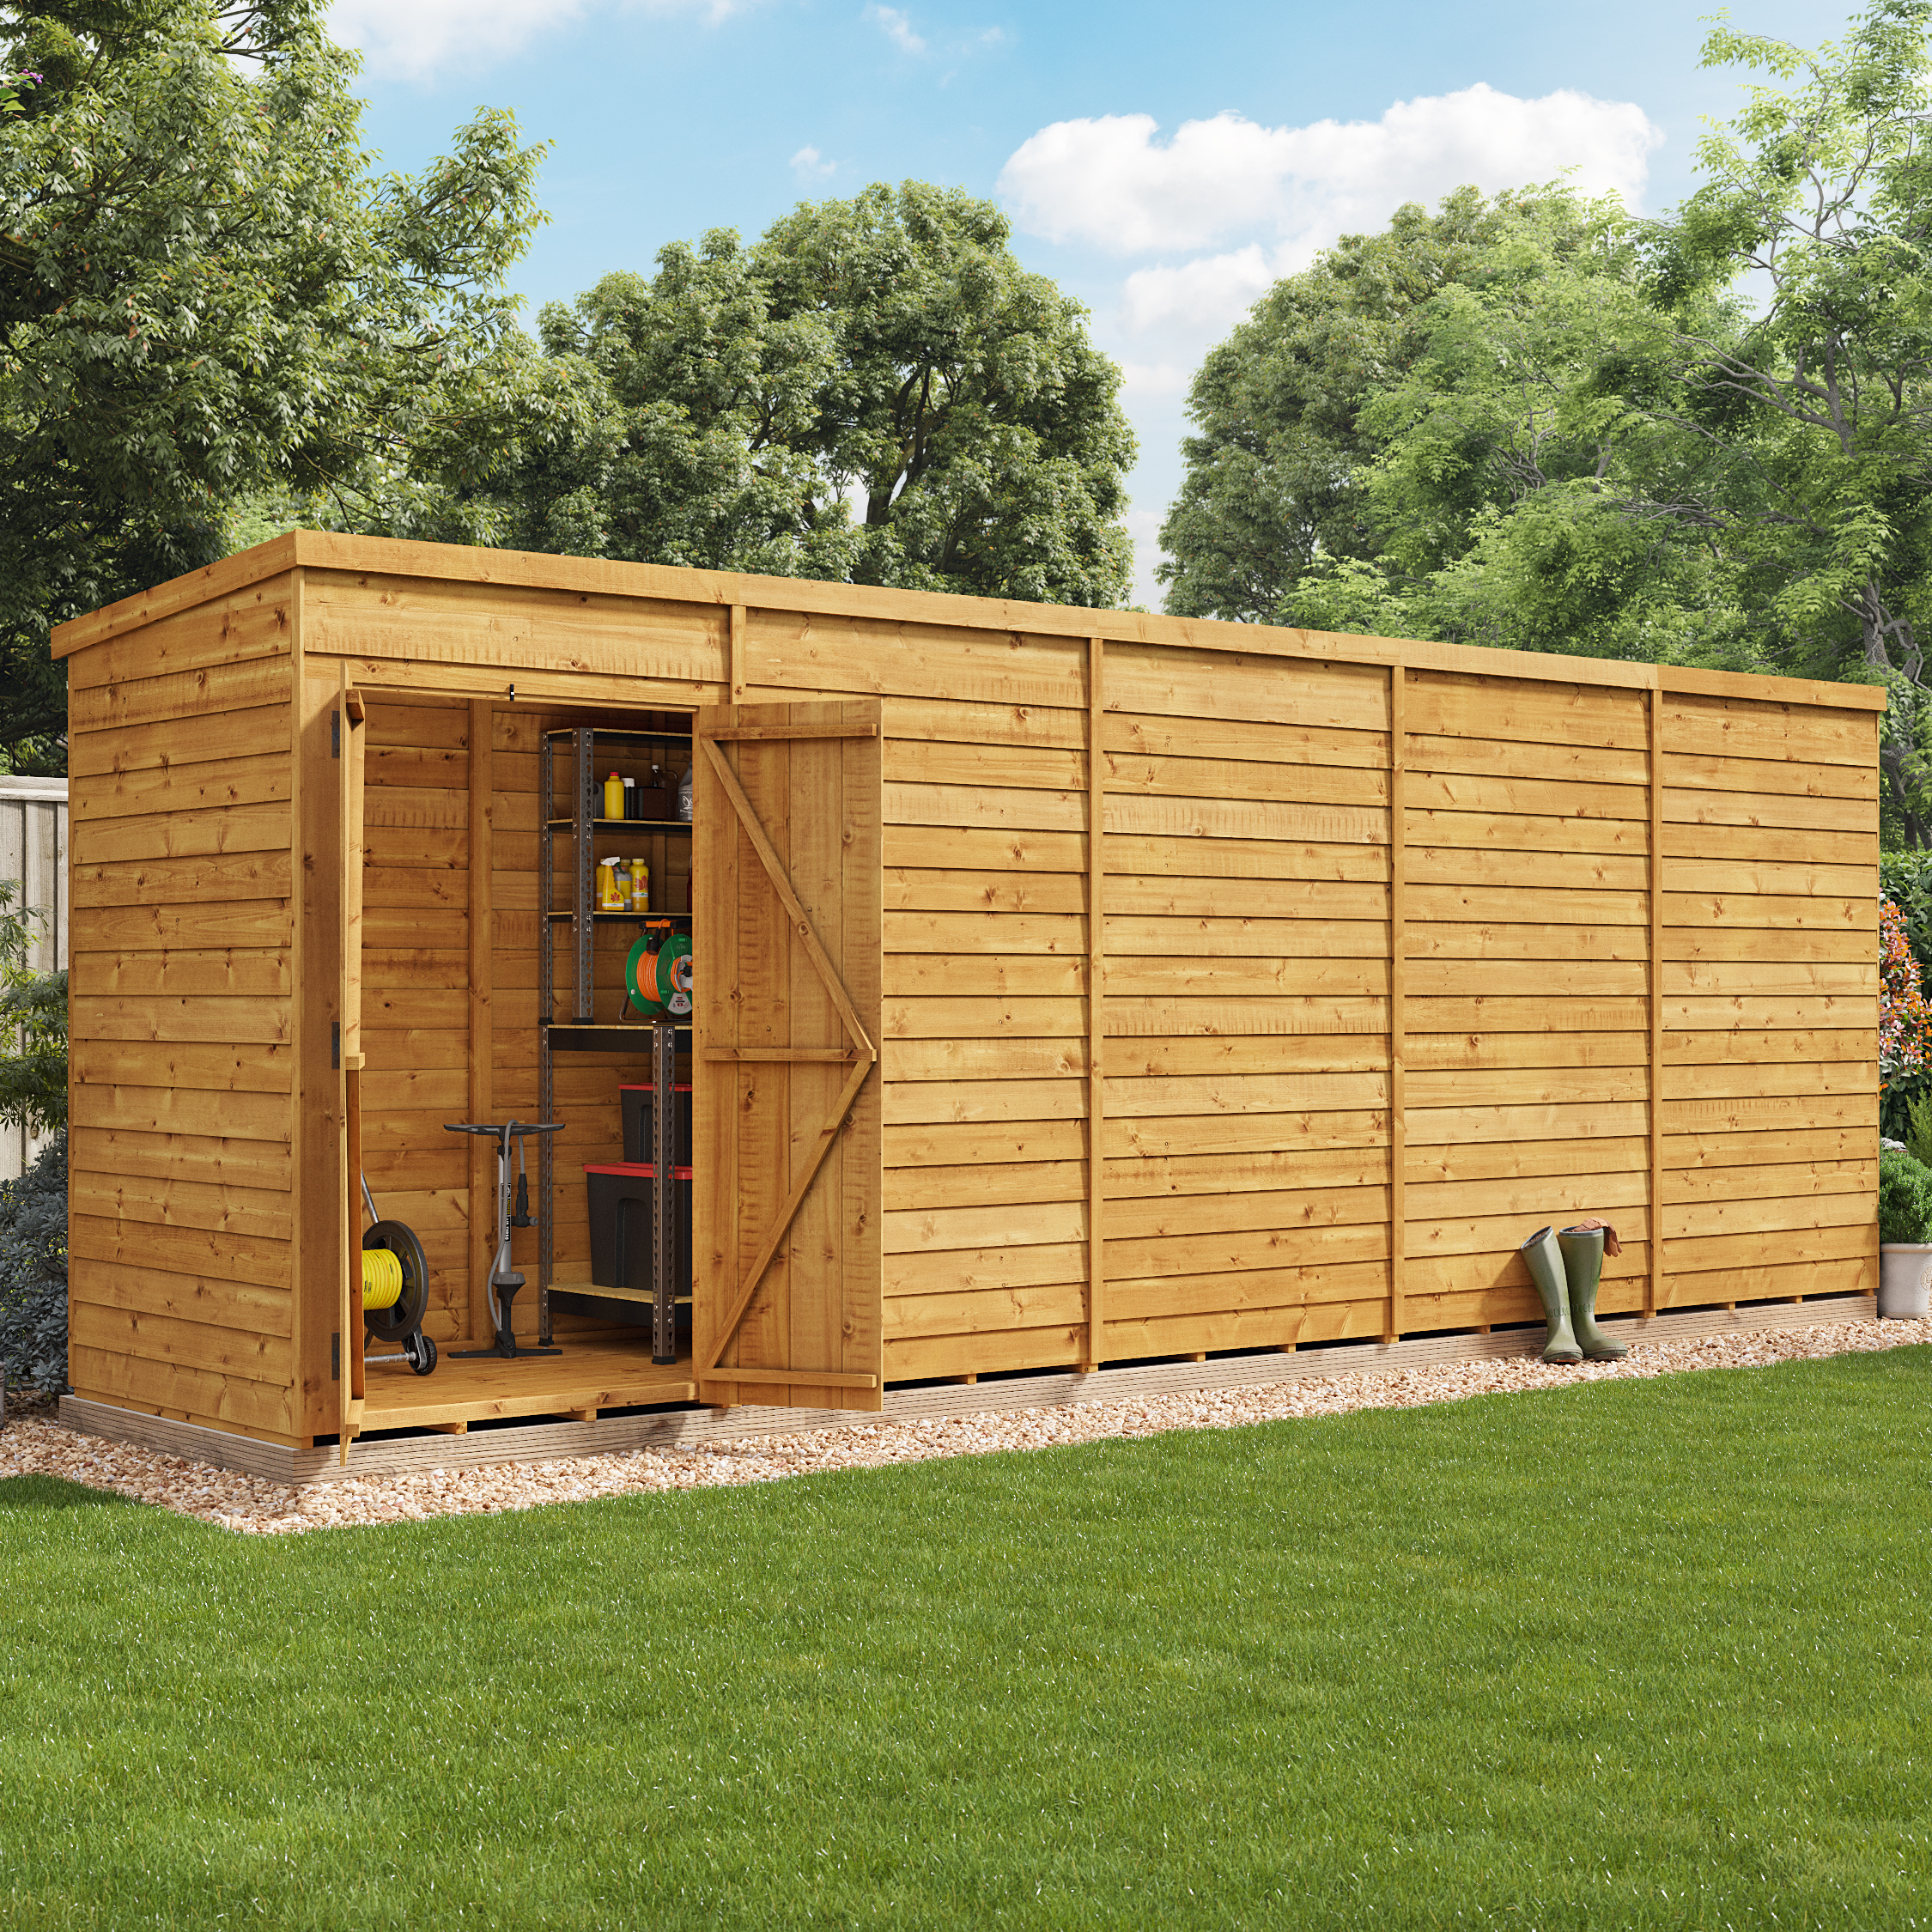 BillyOh Switch Overlap Pent Shed - 20x4 Windowless